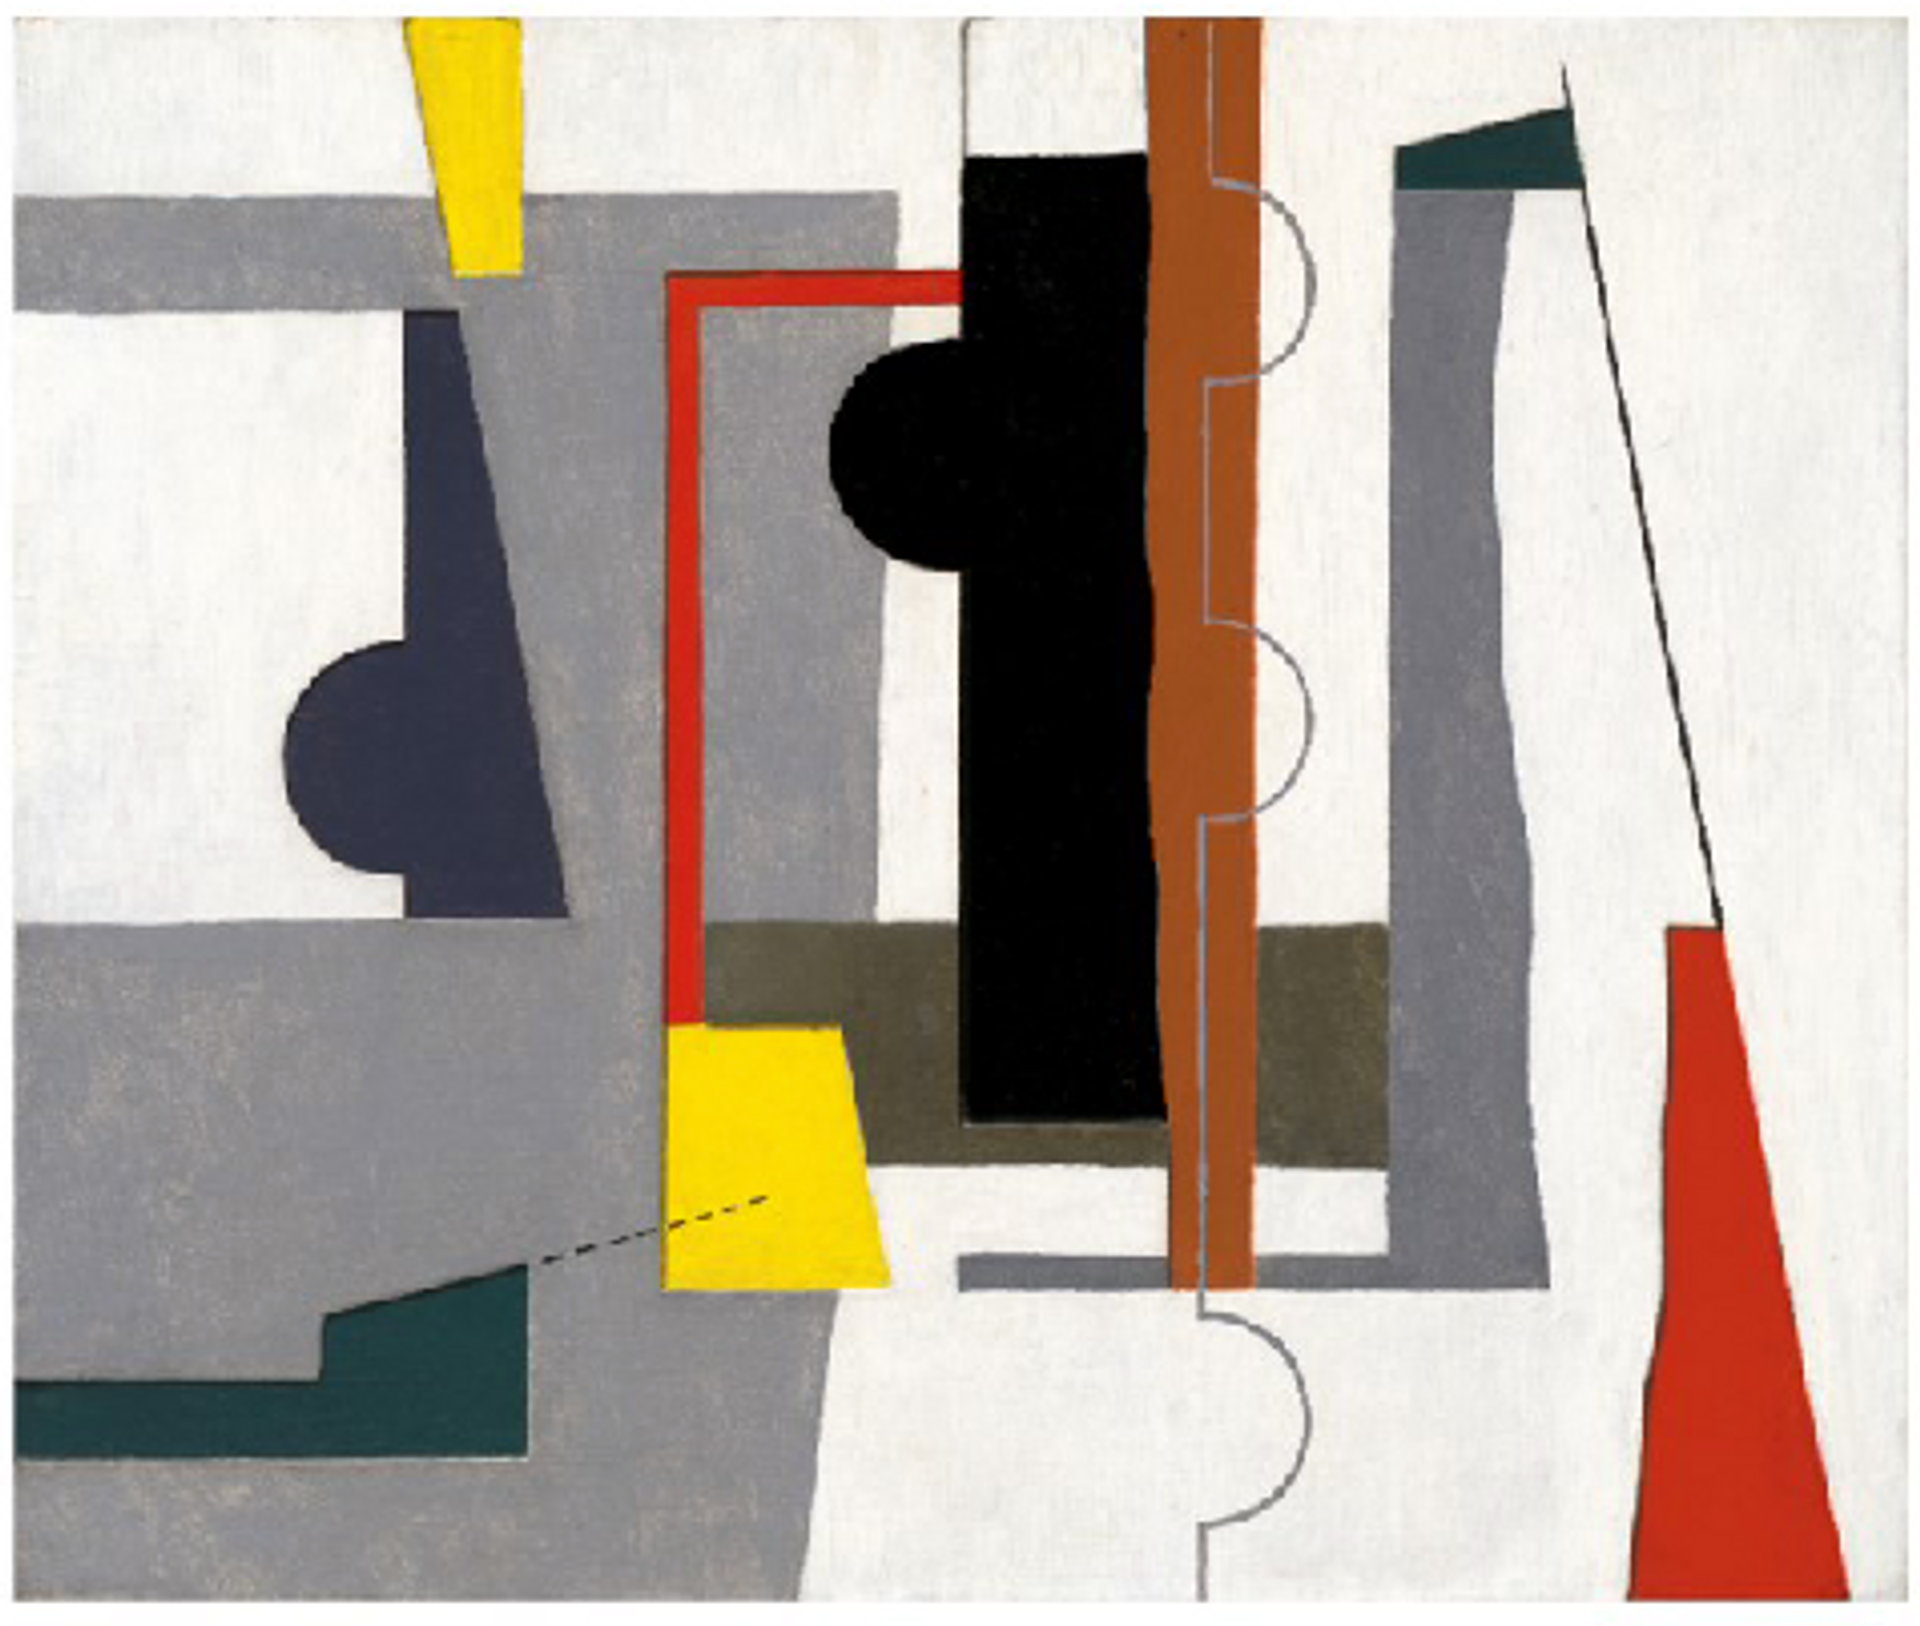 An abstract composition of shapes on a white canvas. The shapes are abstracted and colored in shades of gray, green, yellow, black, brown, and red.